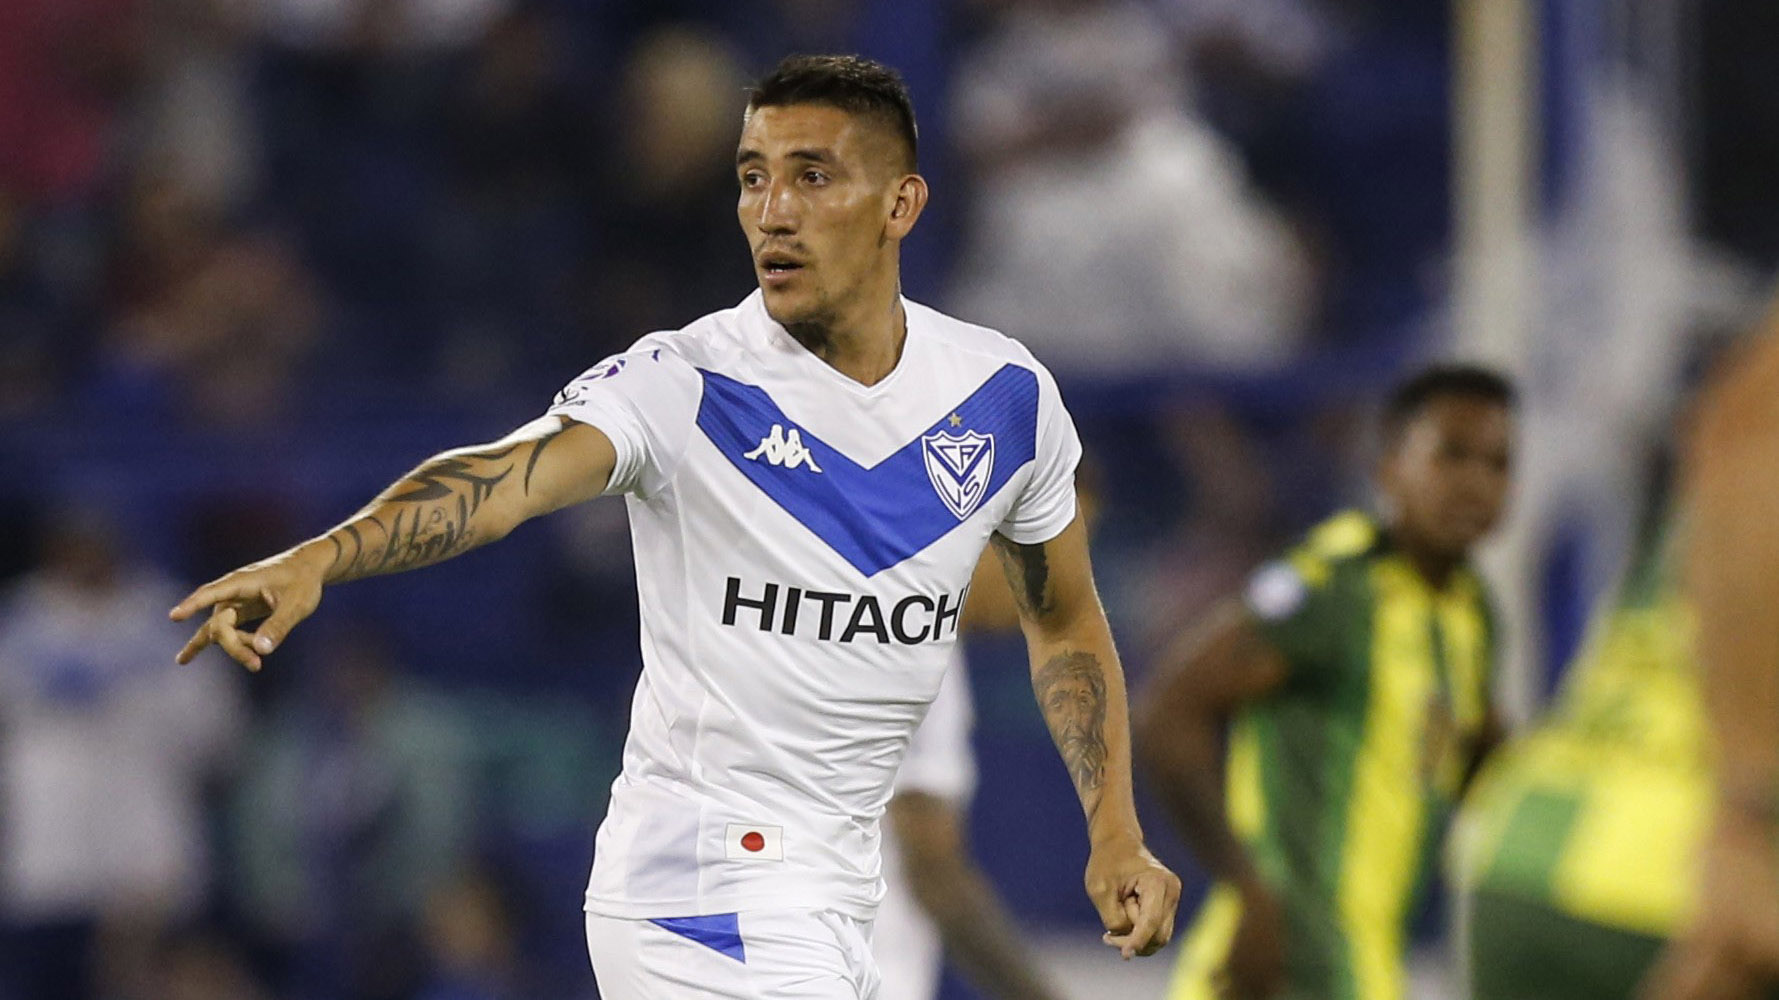 Ricardo Centurión must return to Vélez Sarsfield, who would also not take him into account for the next season